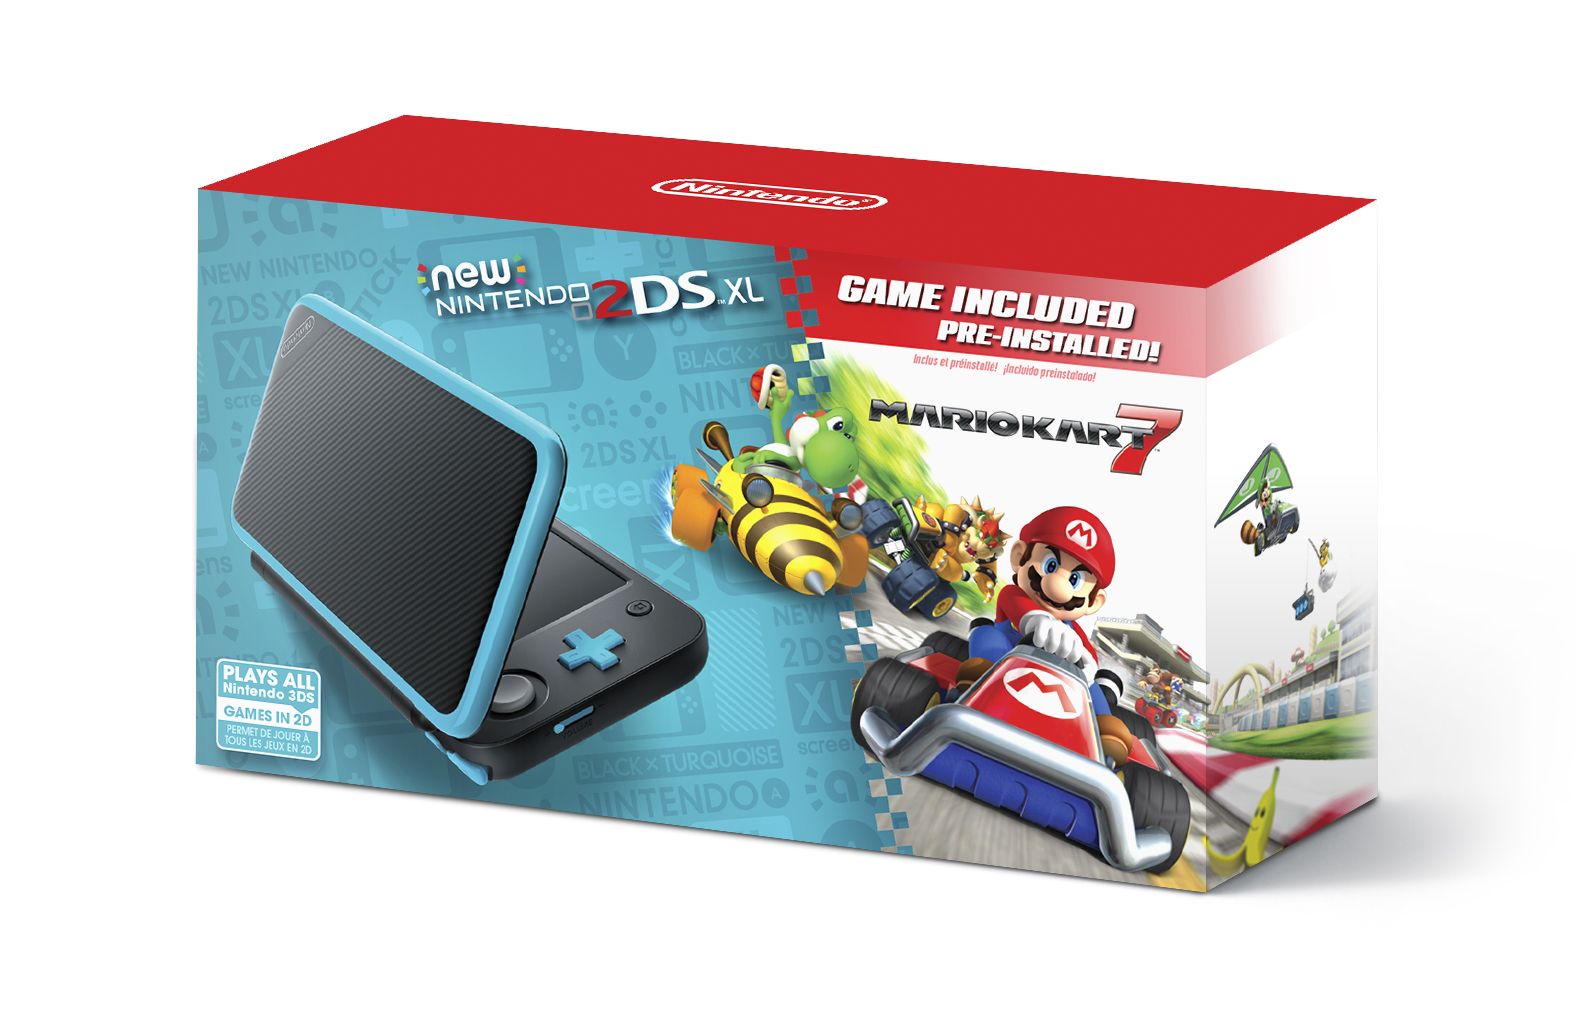 New Nintendo 2DS XL System w/ Mario Kart 7 Pre-installed, Black & Turquoise - image 2 of 6